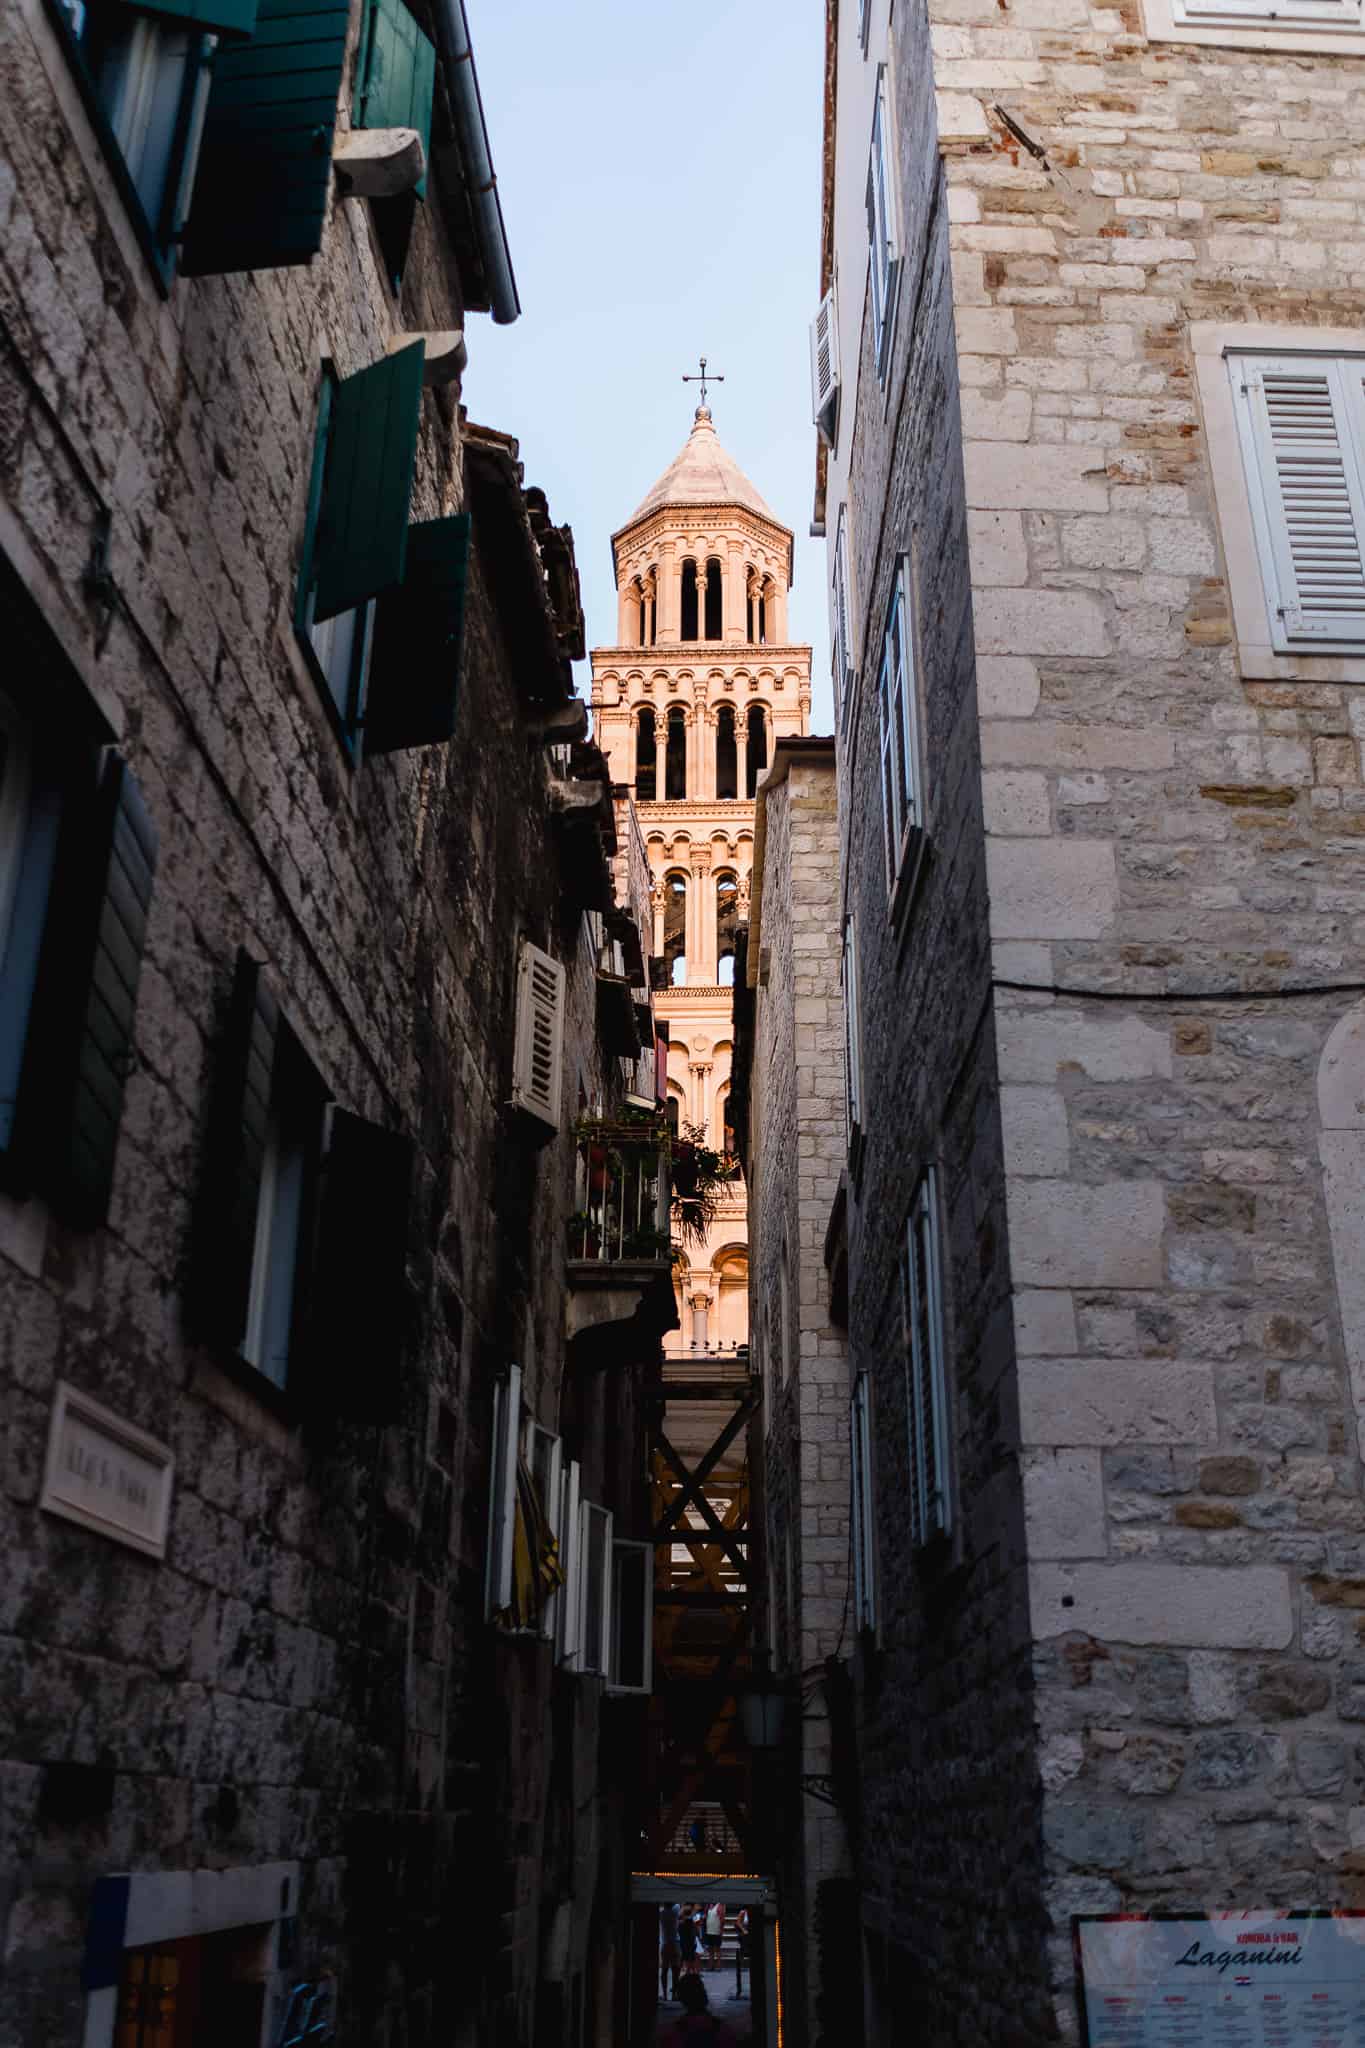 A photo of the Saint Dominus bell tower lit up by the sun with dark buildings in the foreground in the city of split Croatia